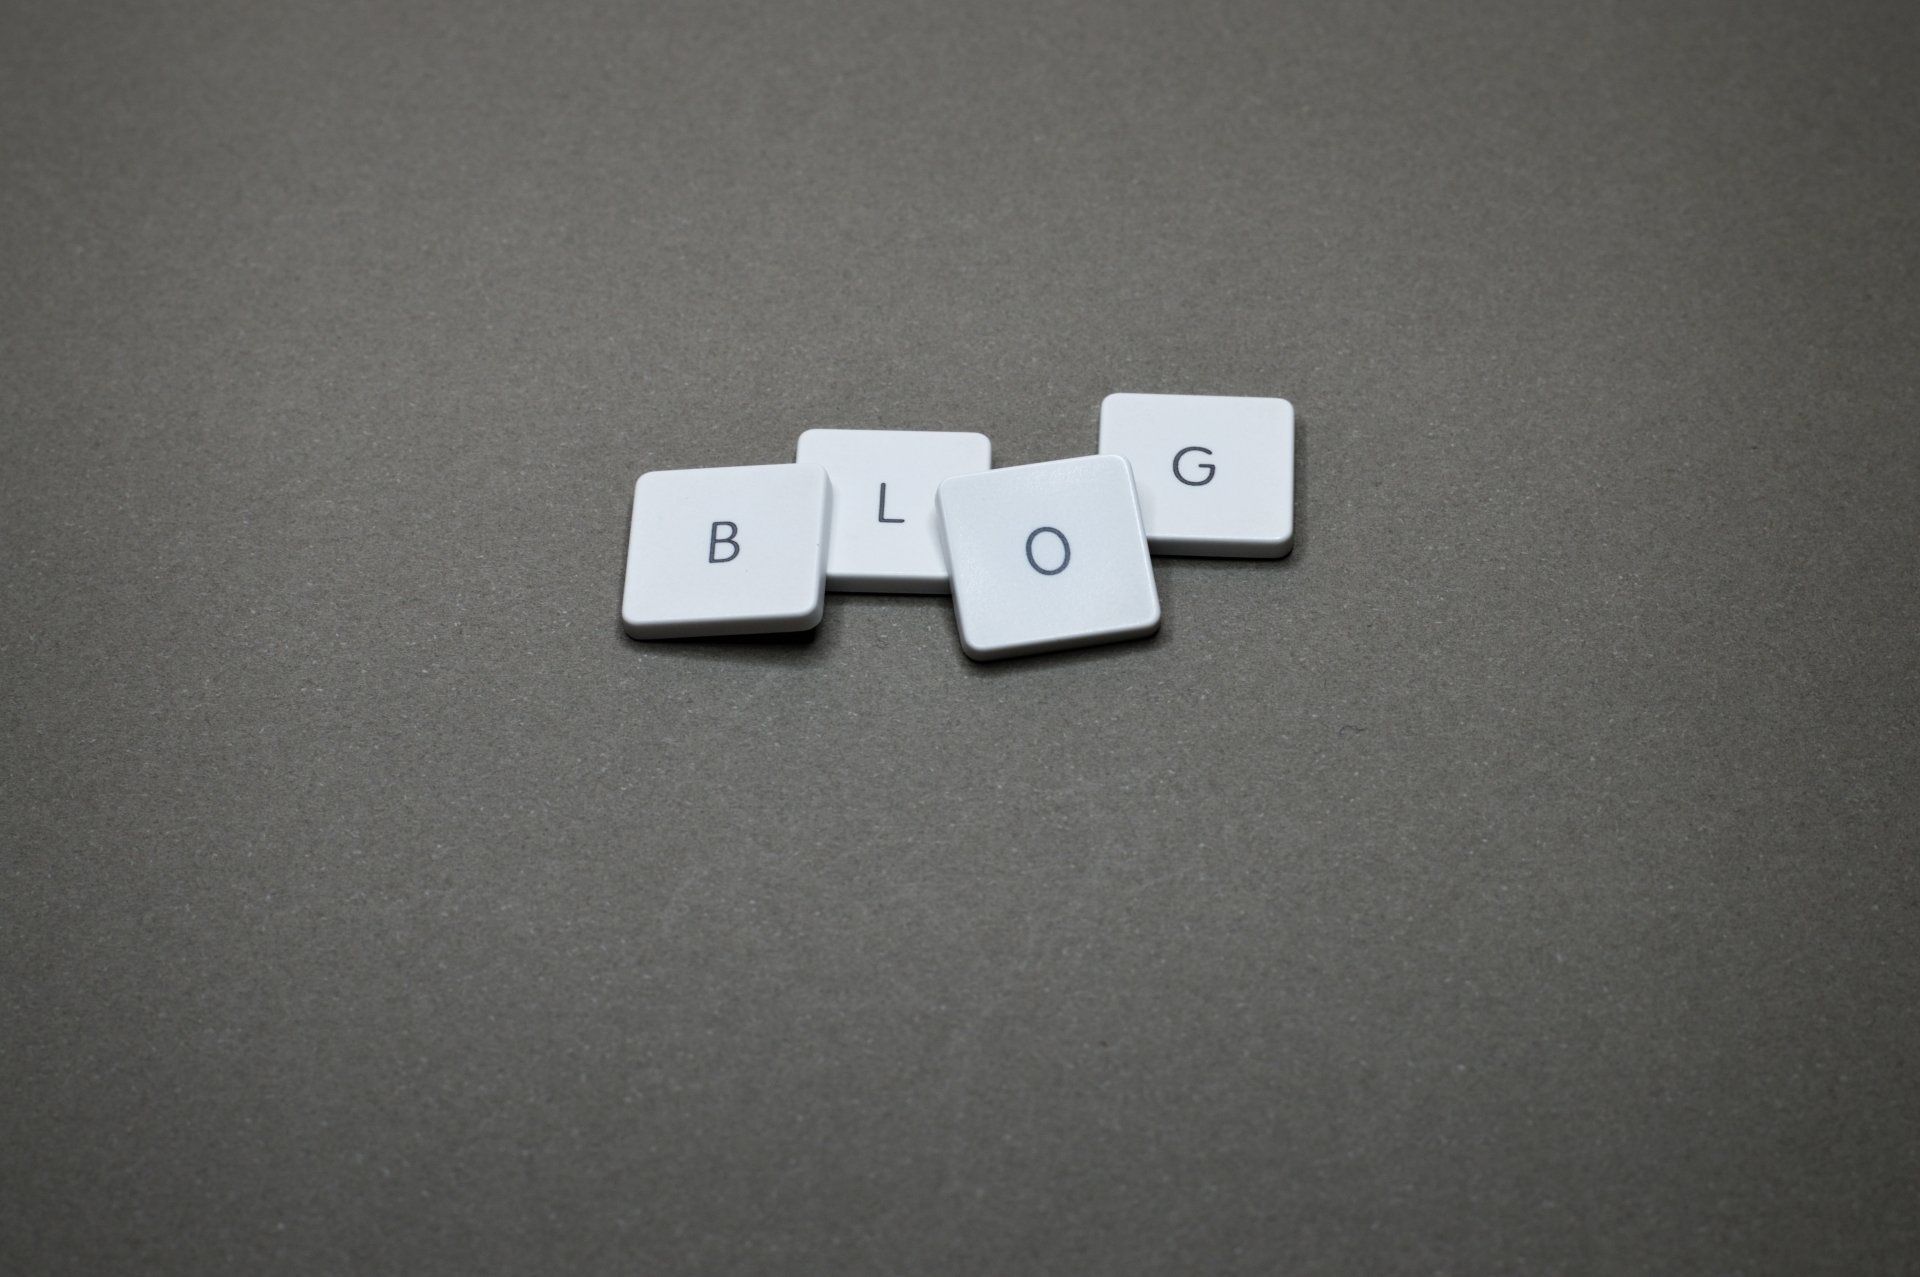 Image of 4 letter cards spelling out the word blog